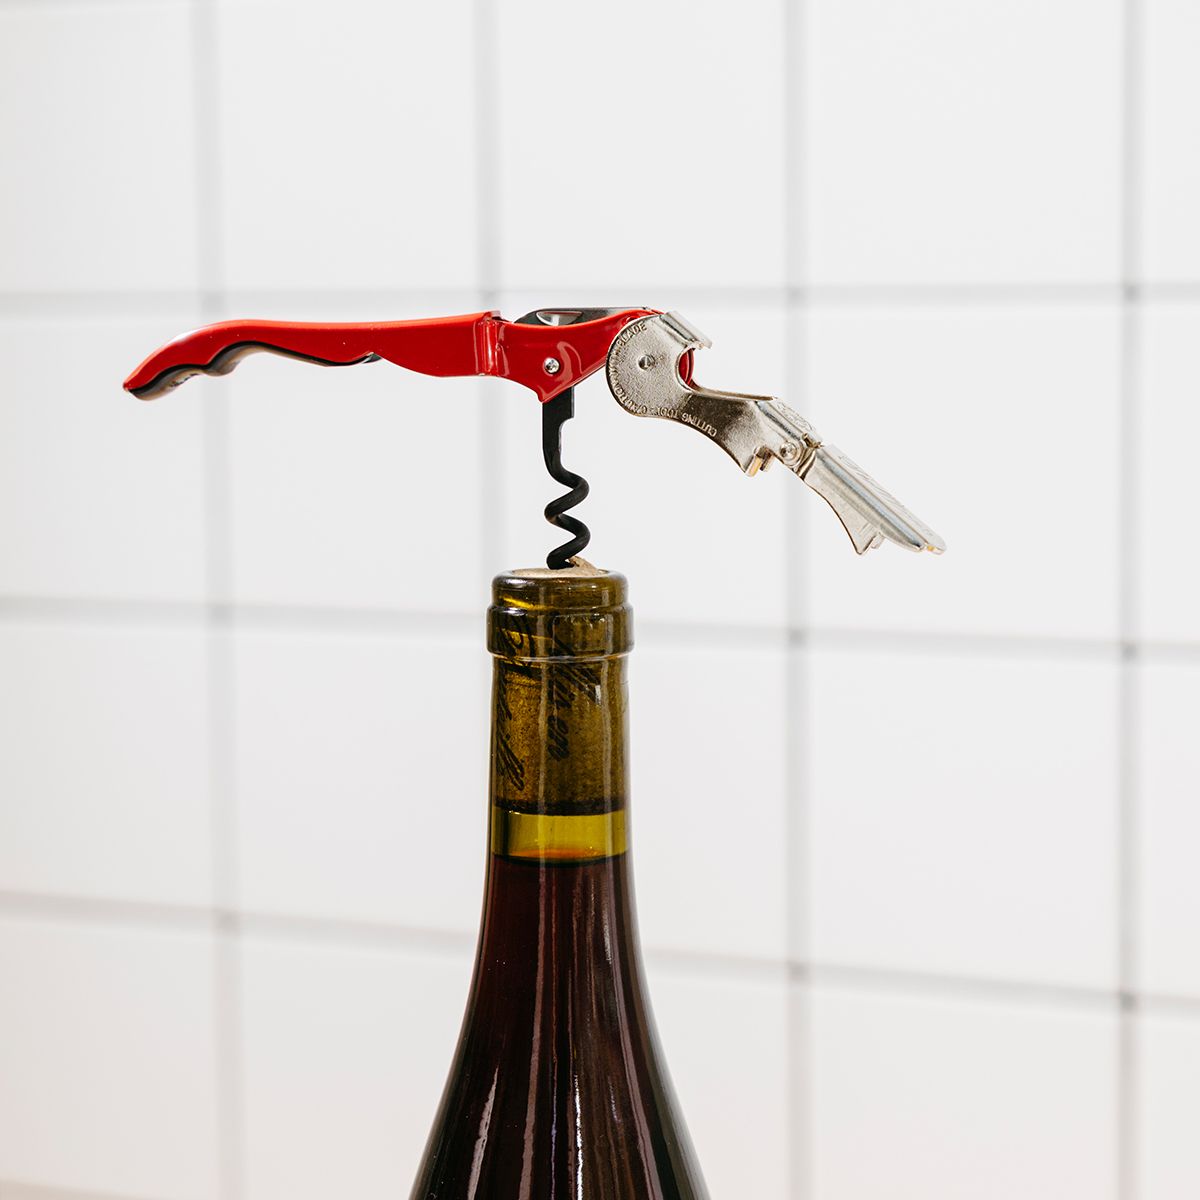 A red corkscrew is in action- screwed into the cork of a green glass wine bottle against a white tile background.